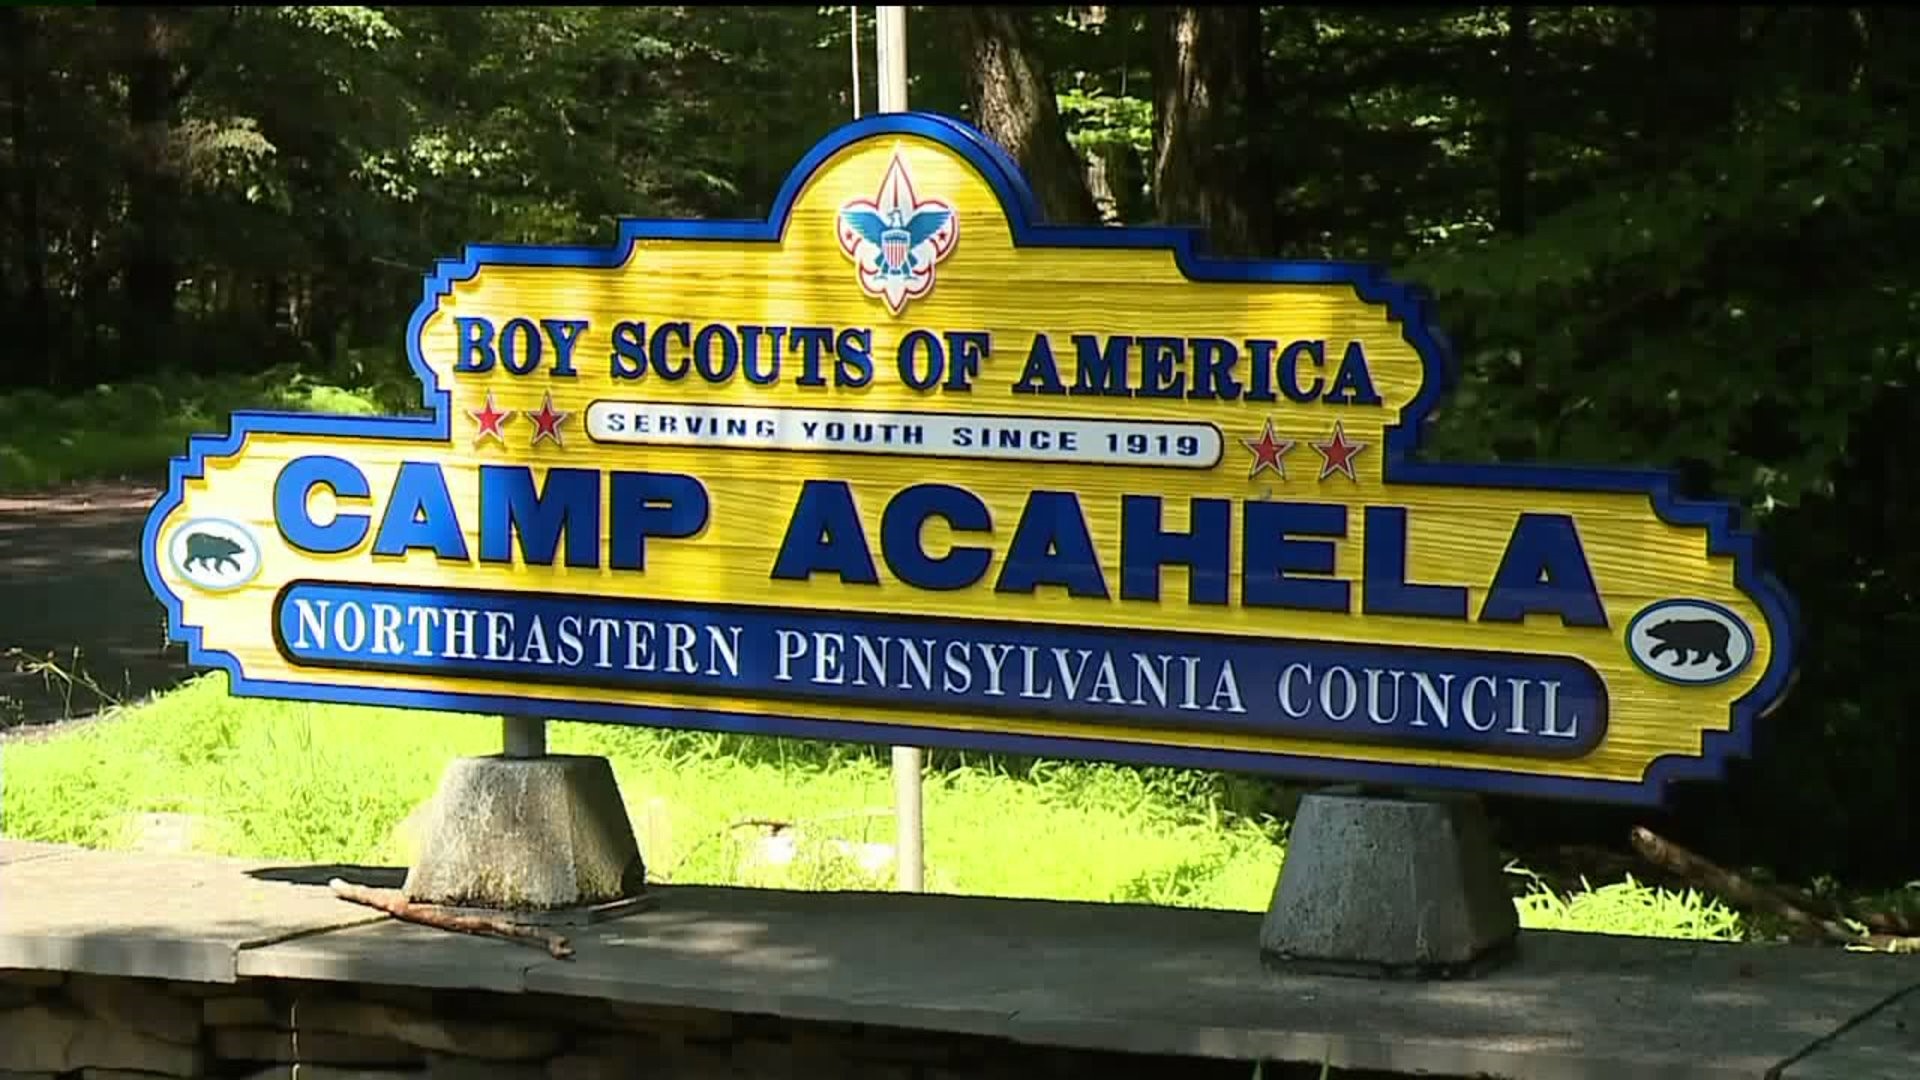 Pittston Man Accused of Threats against Boy Scout Camp Staffers